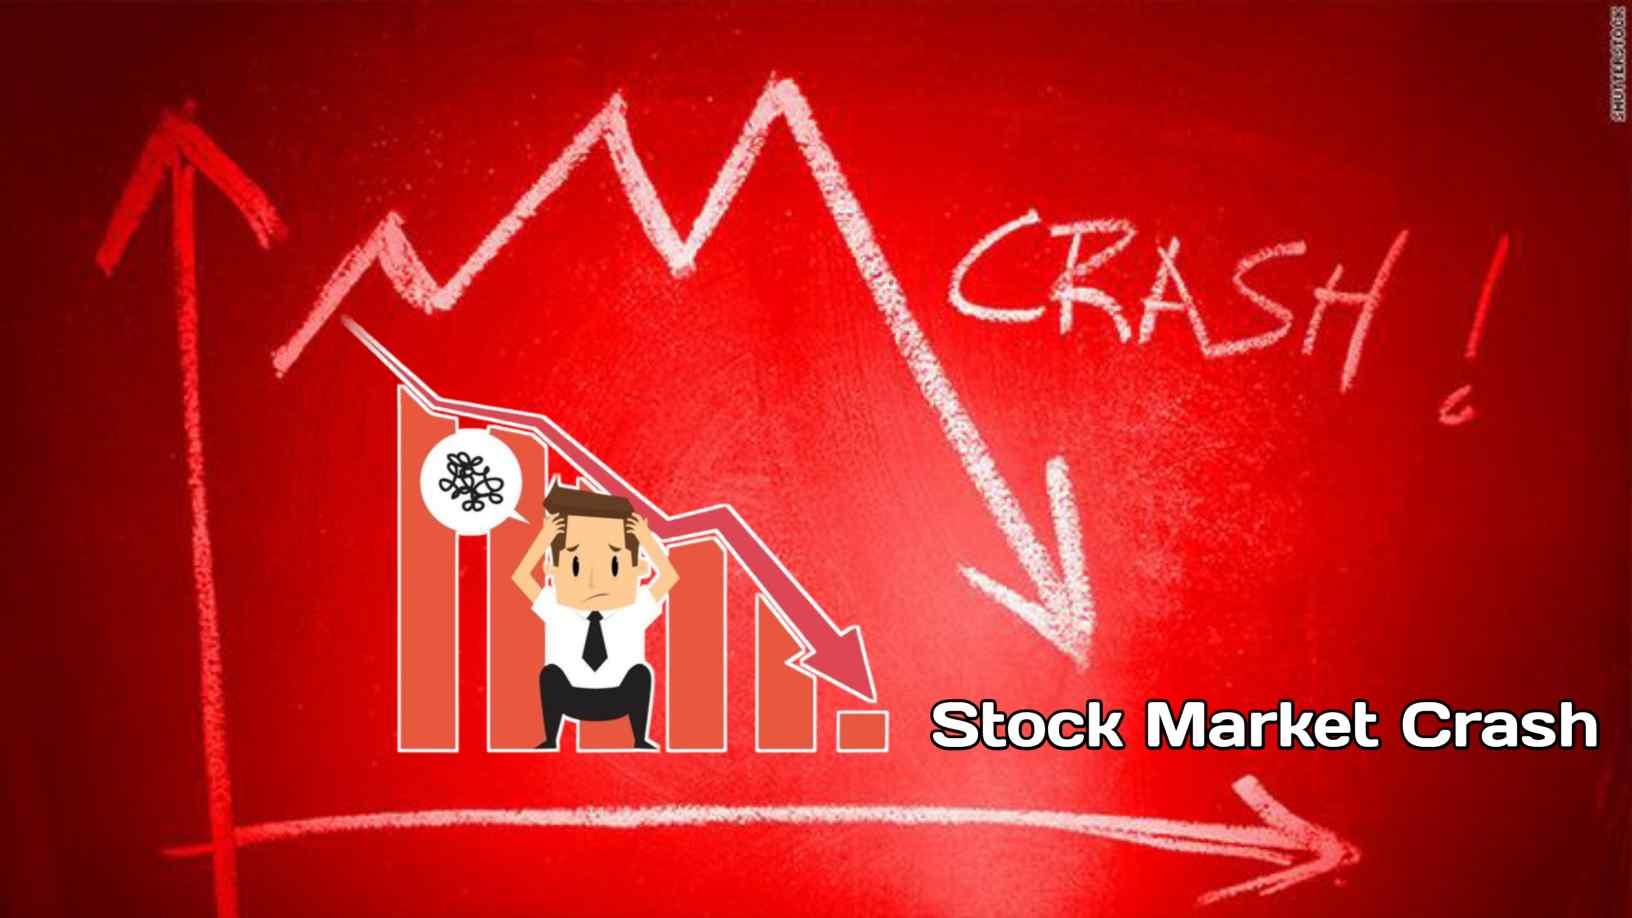 Stock Market Crash/Sensex fell by more than 700 points in half an hour, loss of Rs 4.36 lakh crore